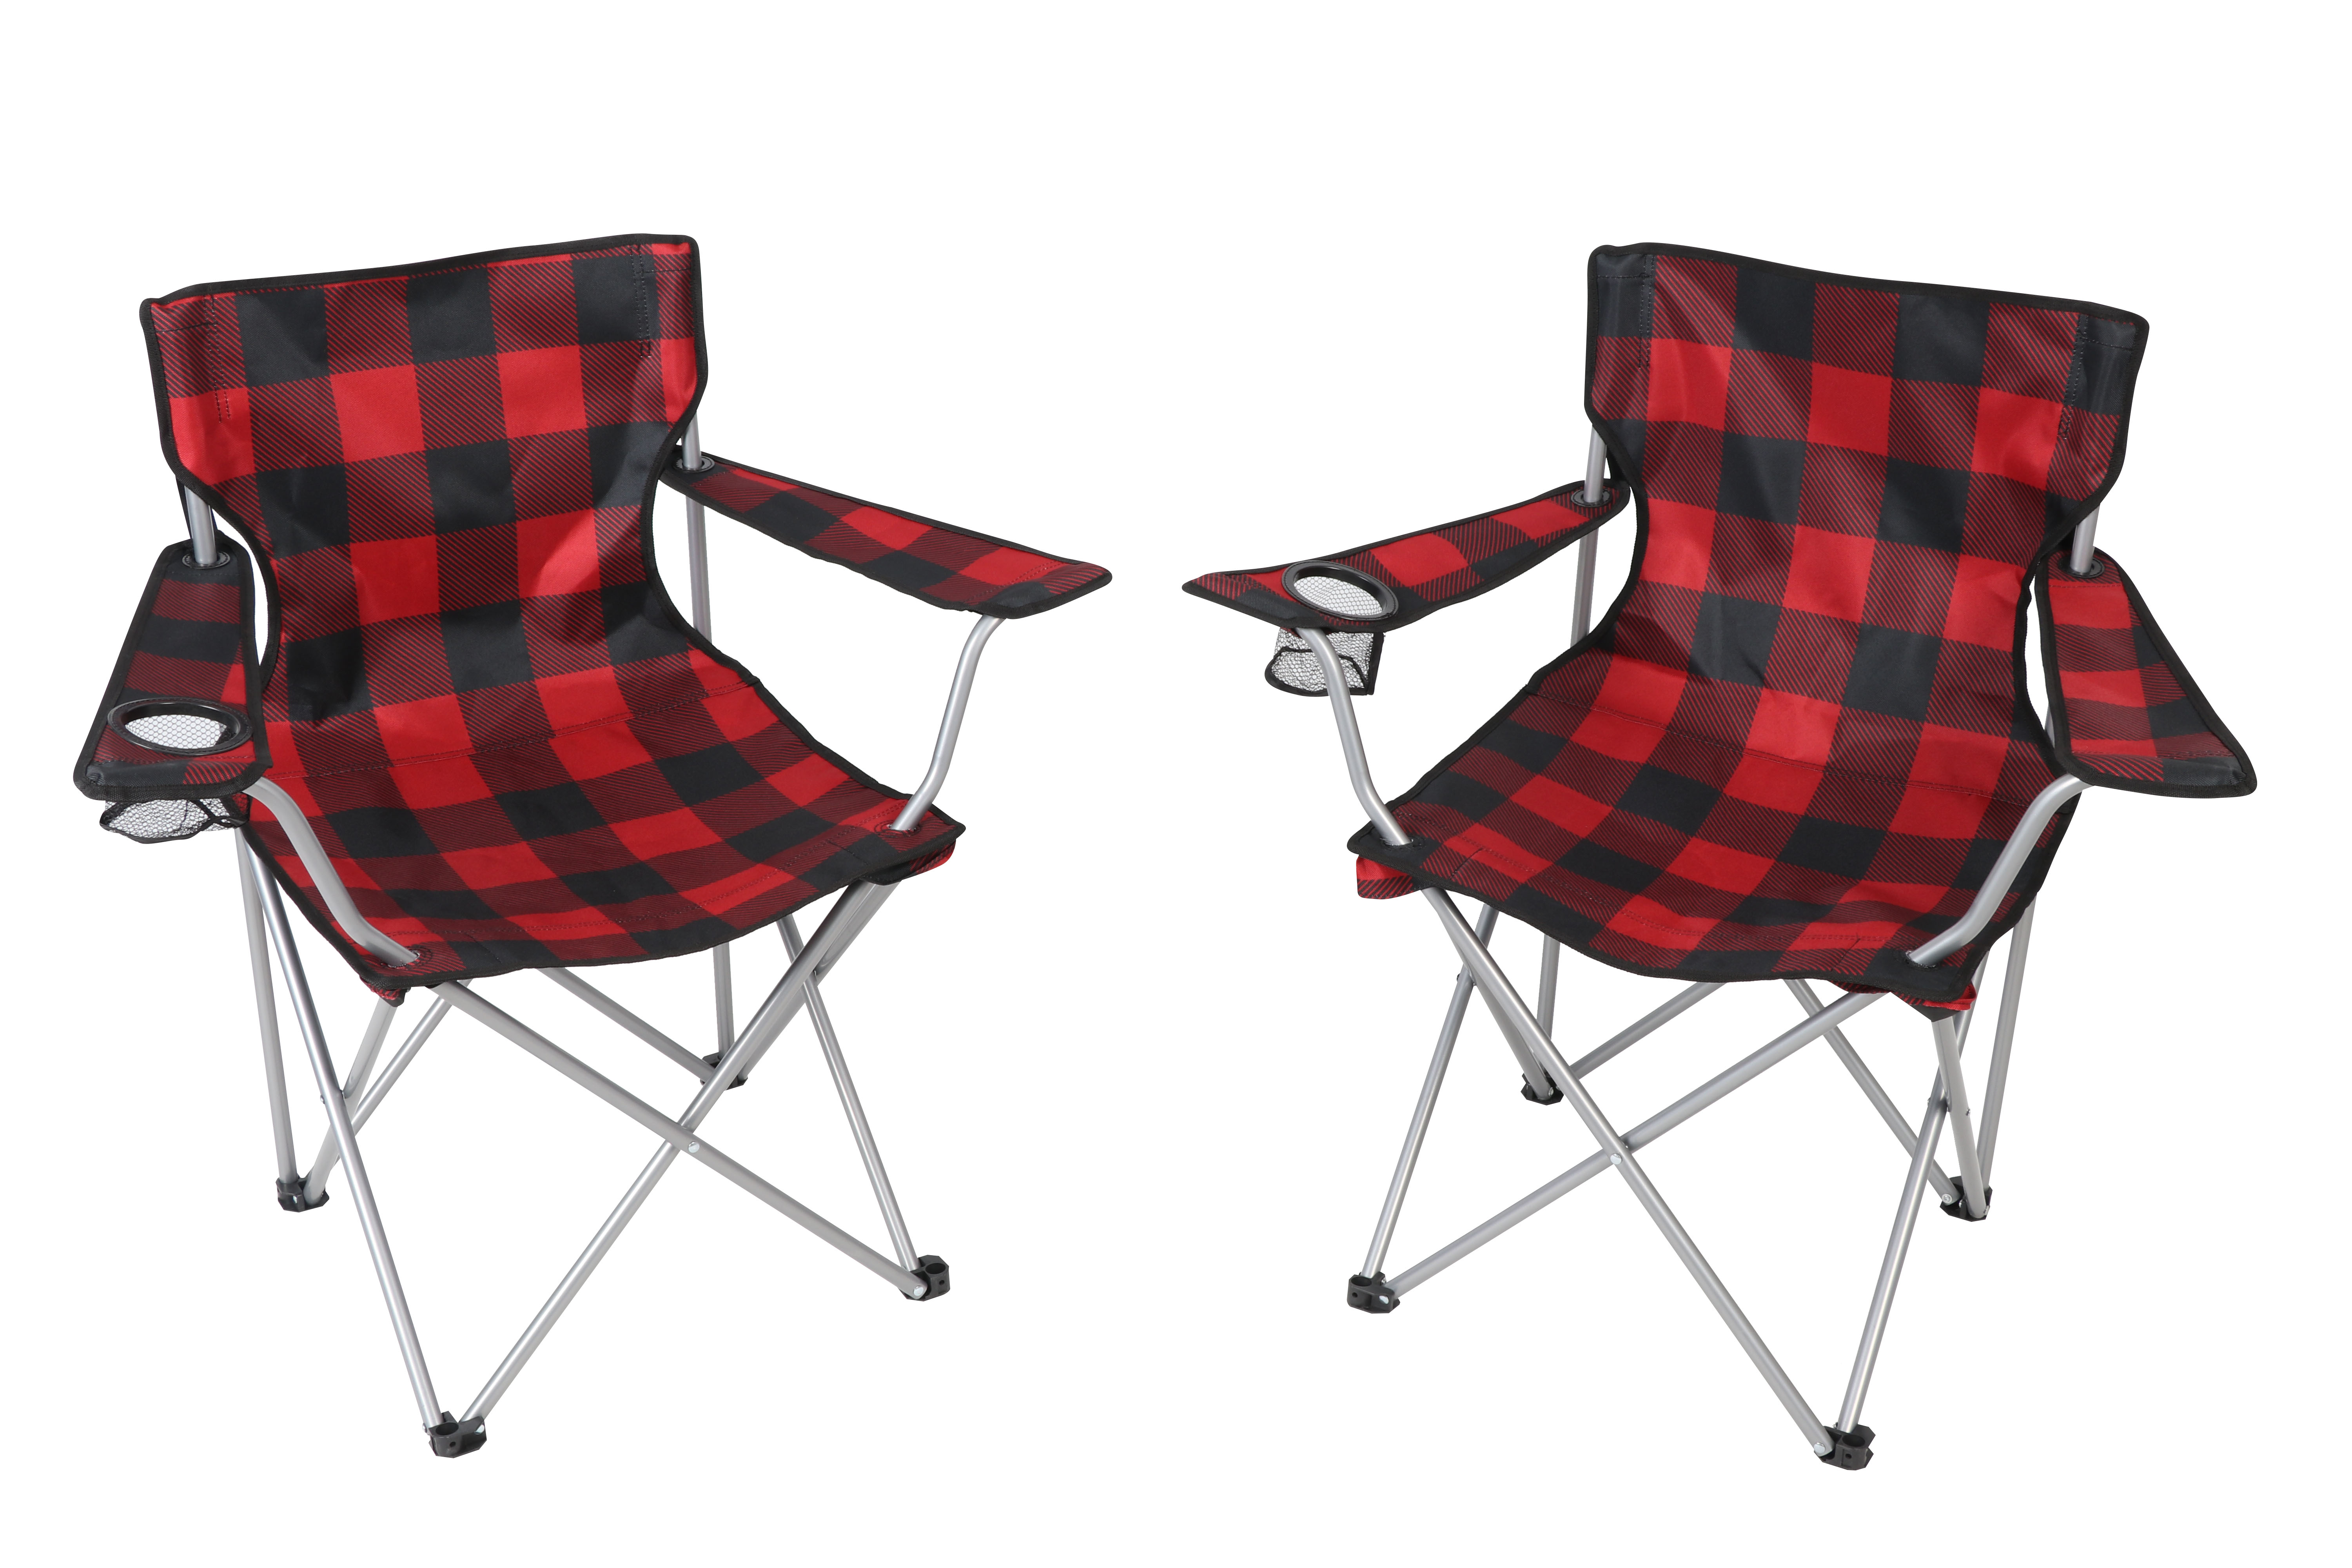 Ozark Trail 3 Piece Buffalo Plaid Camping Chairs and Blanket Combo, Red, Adult - image 2 of 6